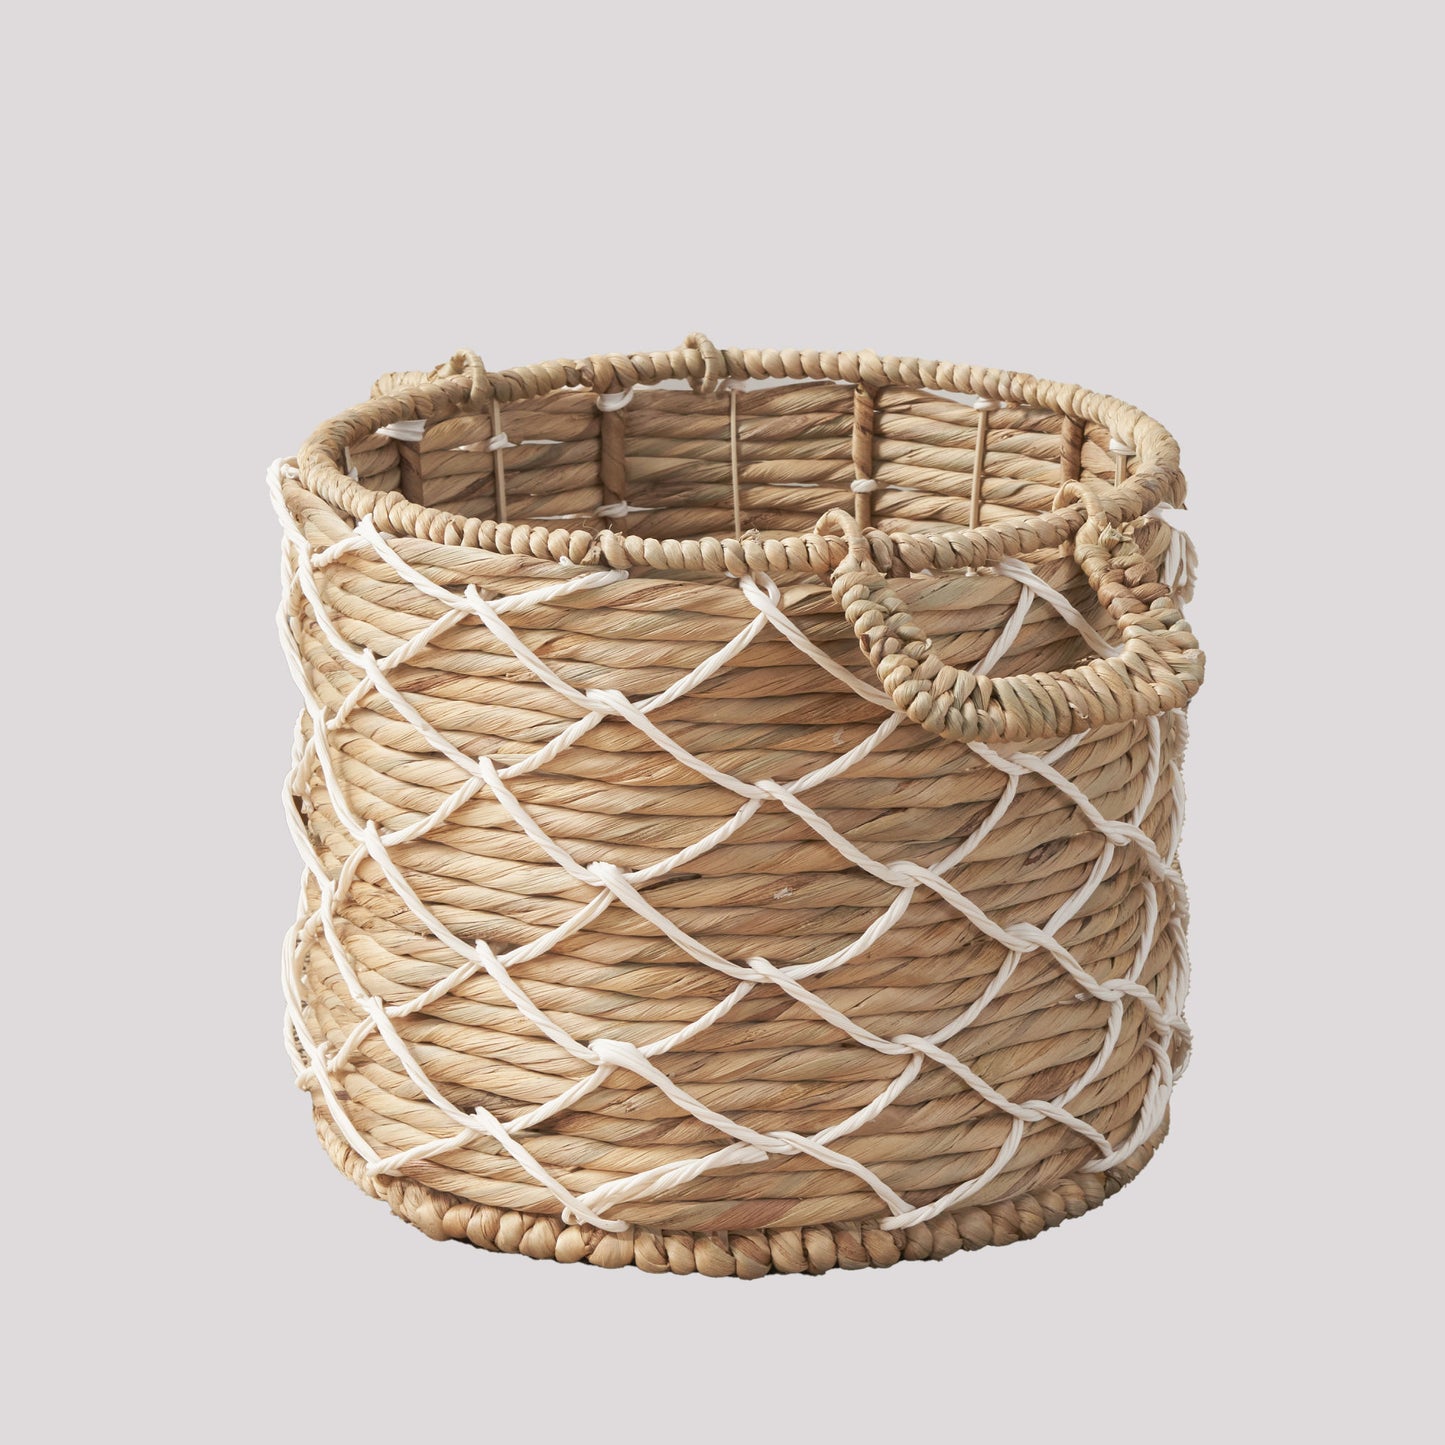 Hubertus Round Water Hyacinth Woven Basket with Handles - 18" x 18" x 15" - Natural Brown - For Clothes, Towels, Canvas, Toys and Magazine Storage and Home Decoration